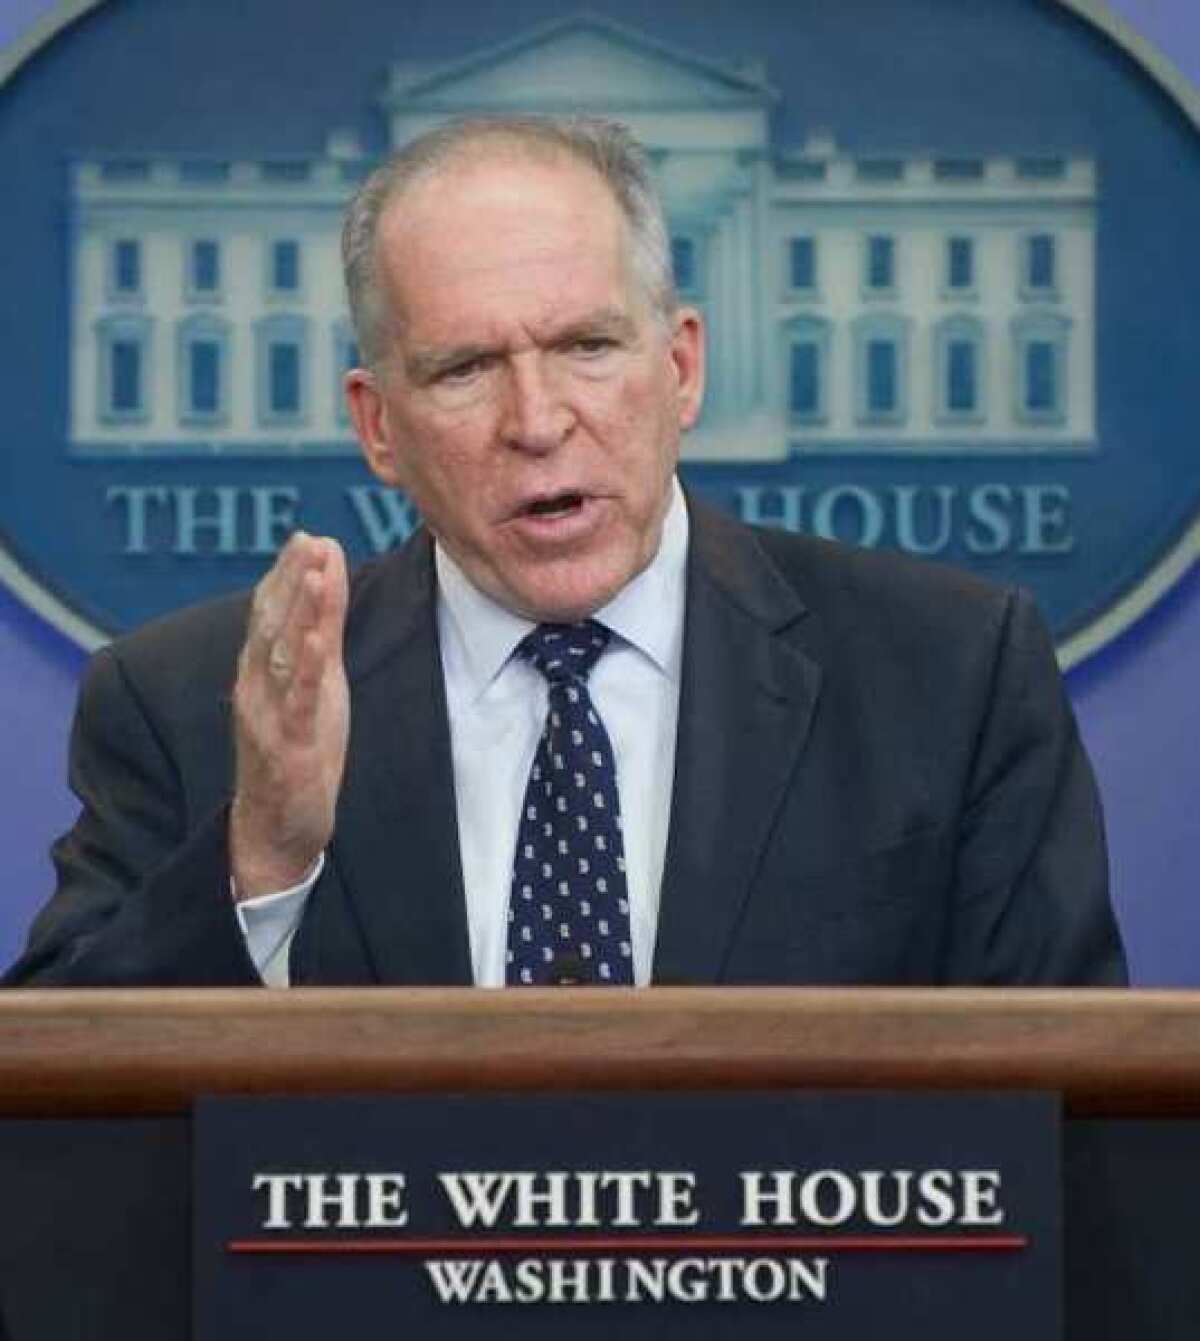 White House counterterrorism adviser John O. Brennan, shown speaking during a daily press briefing, recently defended the Obama administration's use of drones as "legal, ethical and wise."